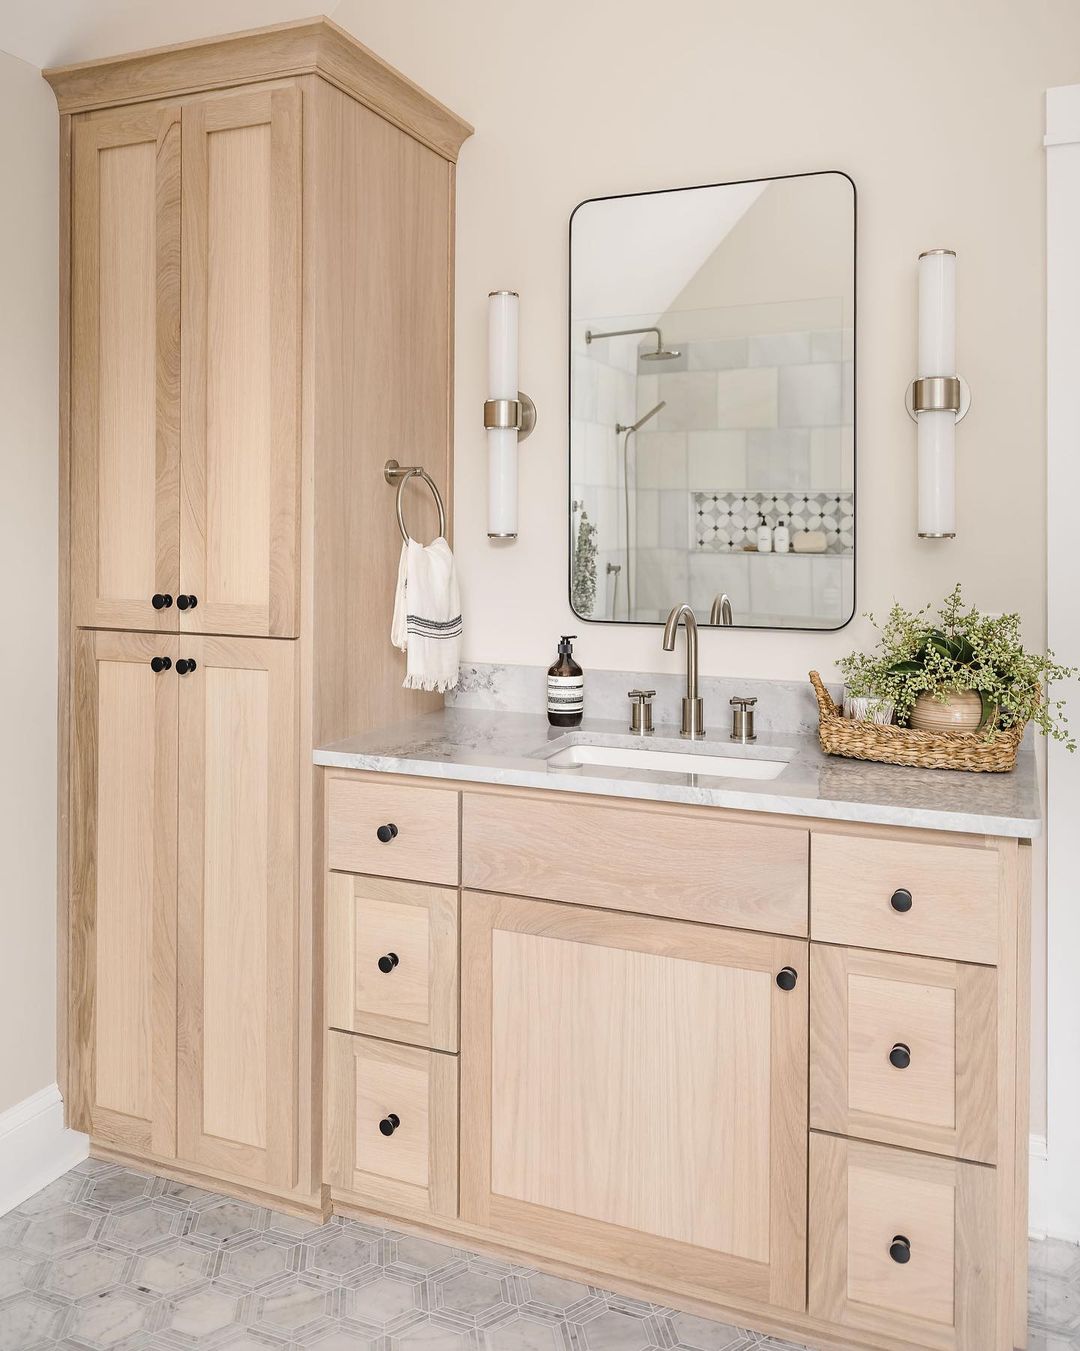 Light wood freestanding cabinets in a bathroom. Photo by Instagram user @delphiniumdesign.